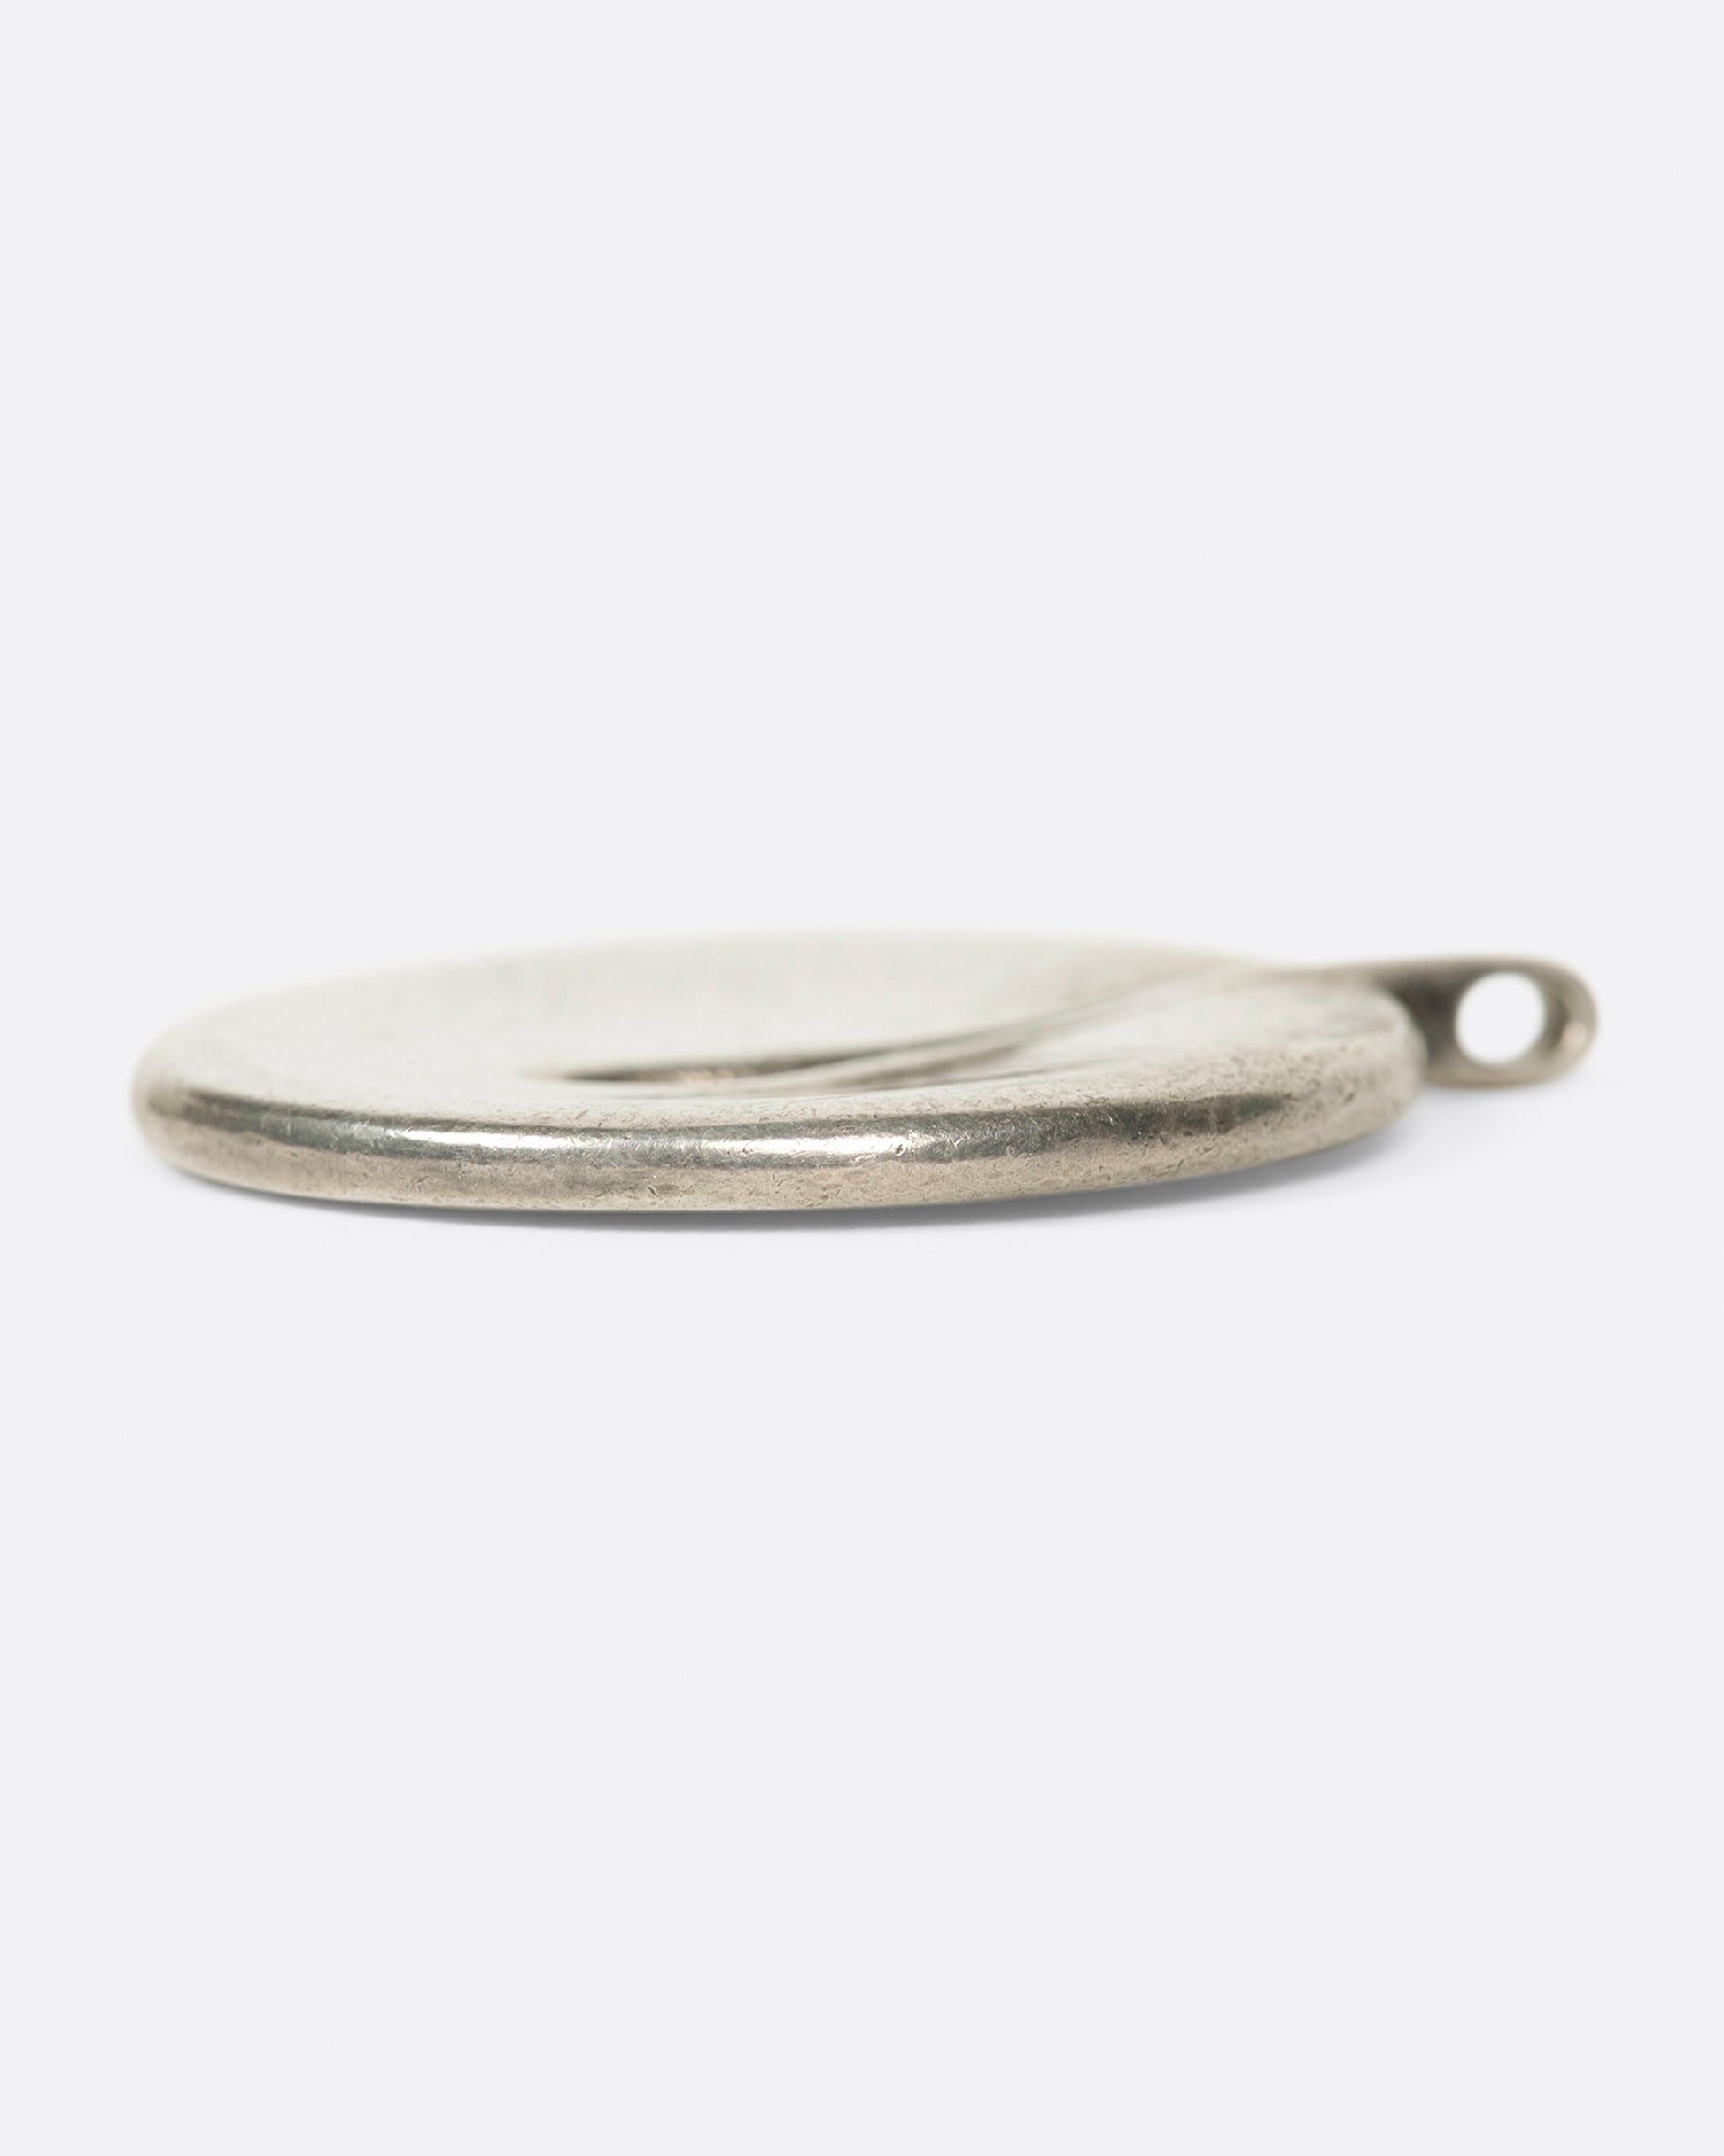 A vintage sterling silver circular pendant with a teardrop opening